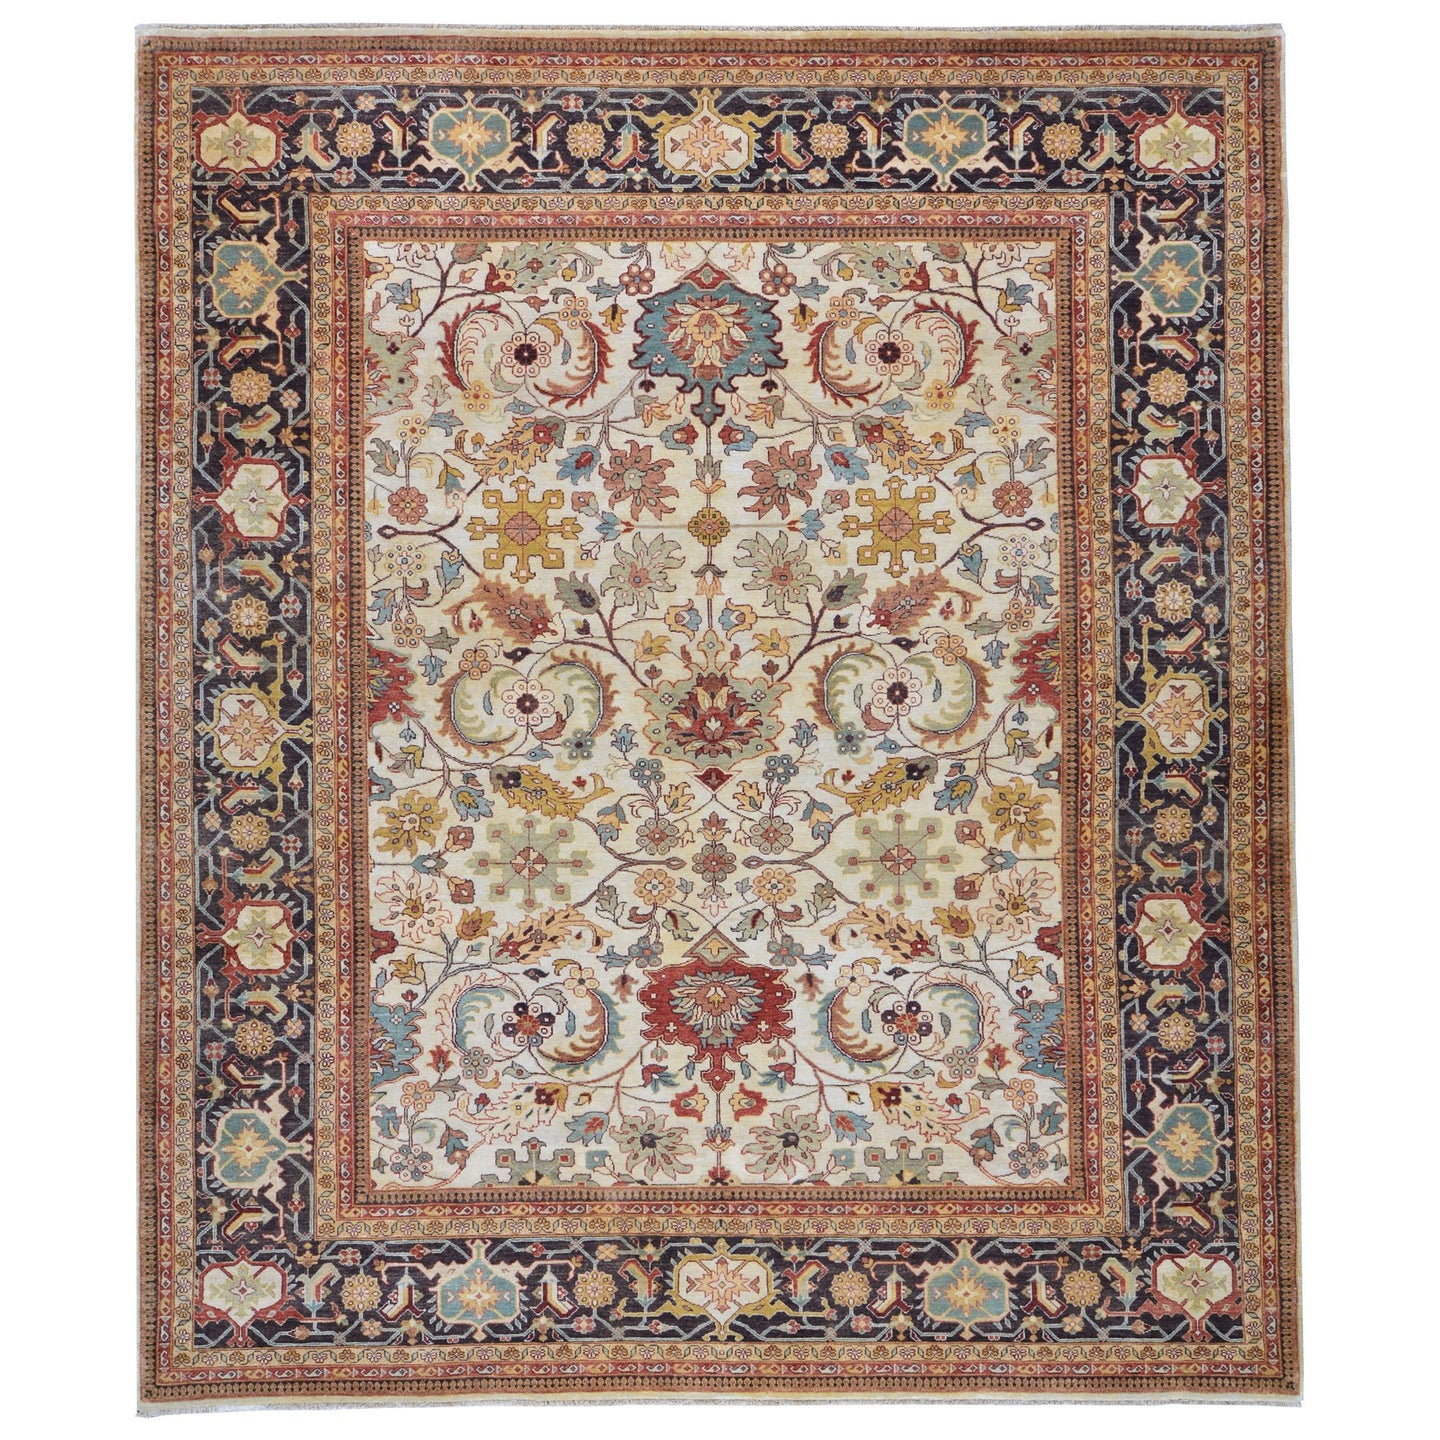 Oriental rugs, hand-knotted carpets, sustainable rugs, classic world oriental rugs, handmade, United States, interior design,  Brrsf-1281